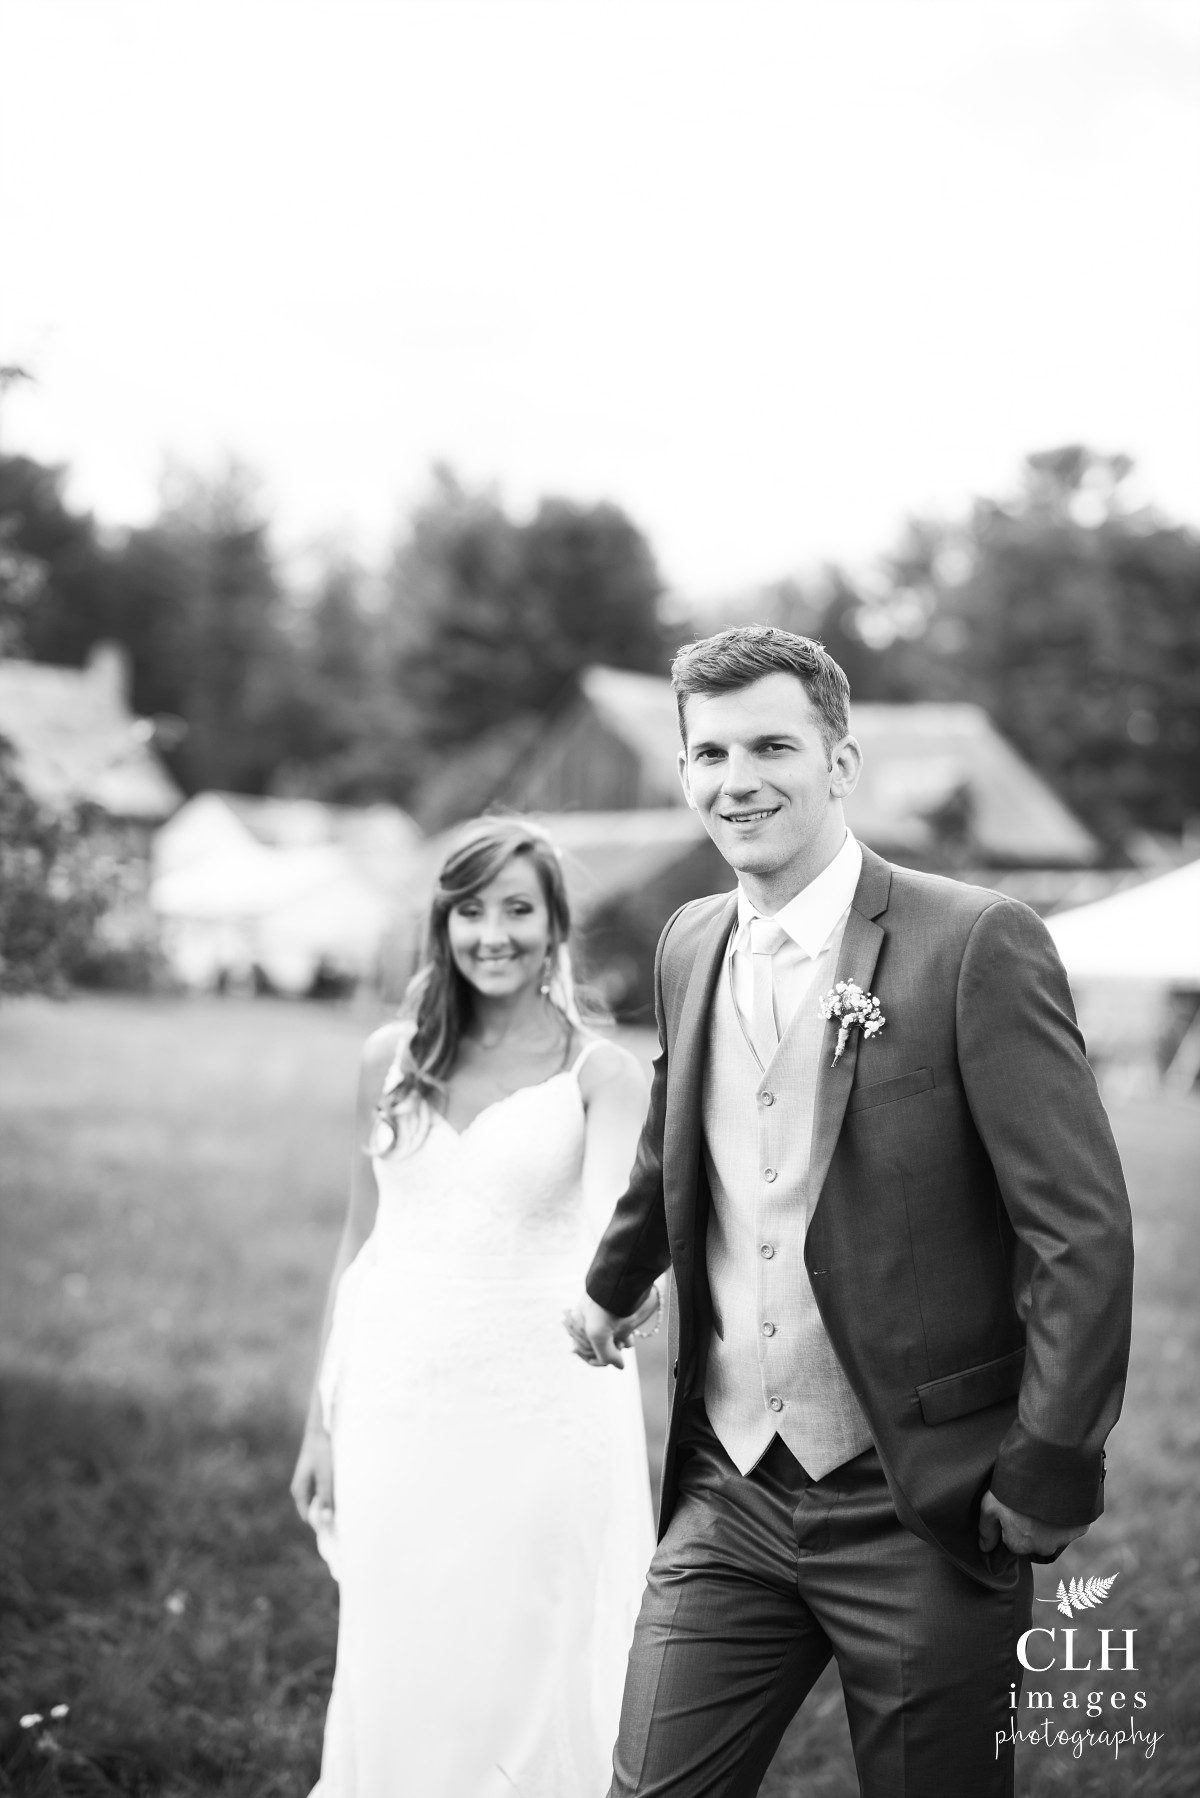 CLH images Photography - Adirondack Weddings - Adirondack Photographer - Rustic Wedding - Barn Wedding - Burlap and Beams Wedding - Jessica and Ryan (97)